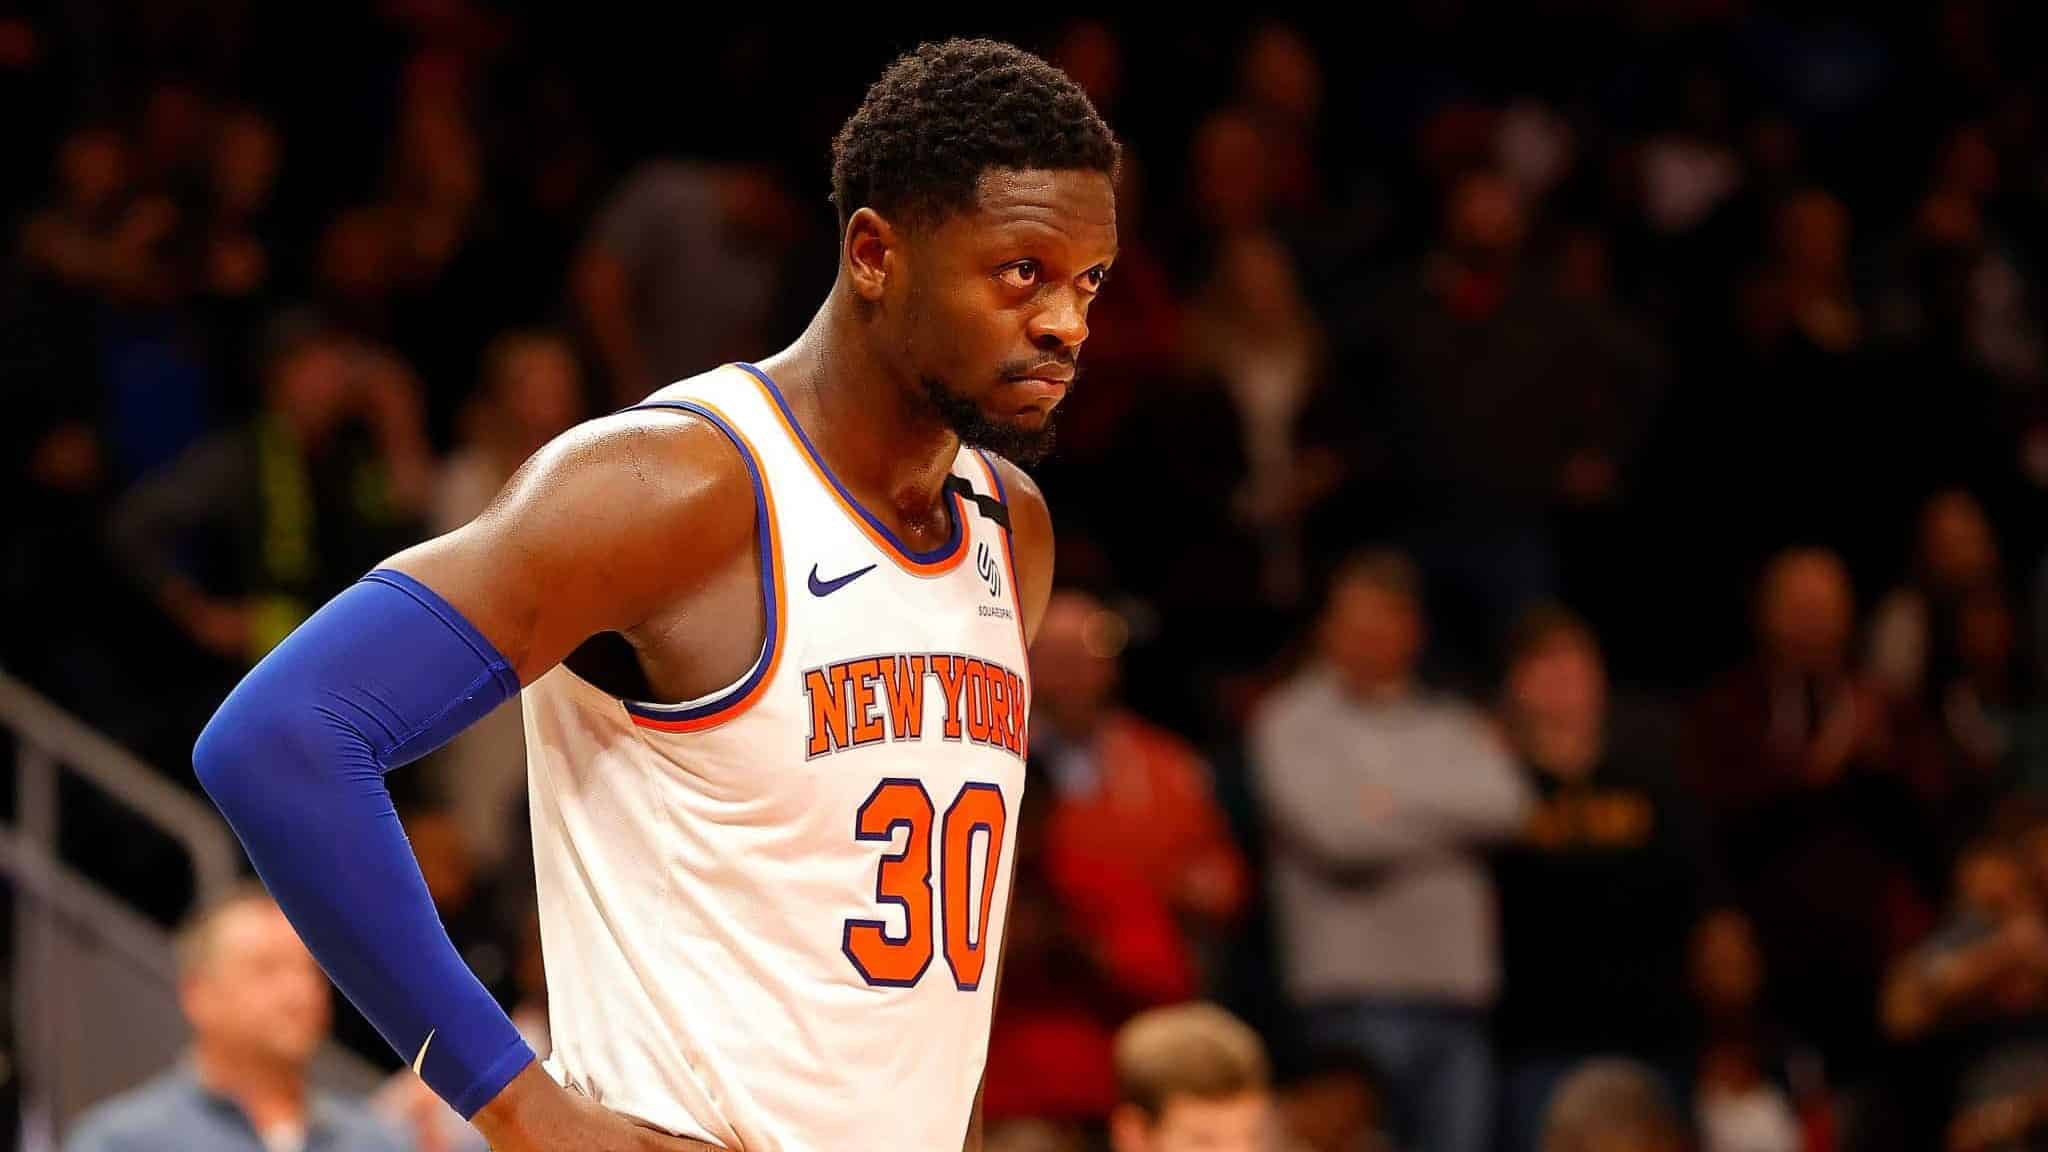 ATLANTA, GEORGIA - FEBRUARY 09: Julius Randle #30 of the New York Knicks reacts in the first overtime against the Atlanta Hawks at State Farm Arena on February 09, 2020 in Atlanta, Georgia. NOTE TO USER: User expressly acknowledges and agrees that, by downloading and/or using this photograph, user is consenting to the terms and conditions of the Getty Images License Agreement.